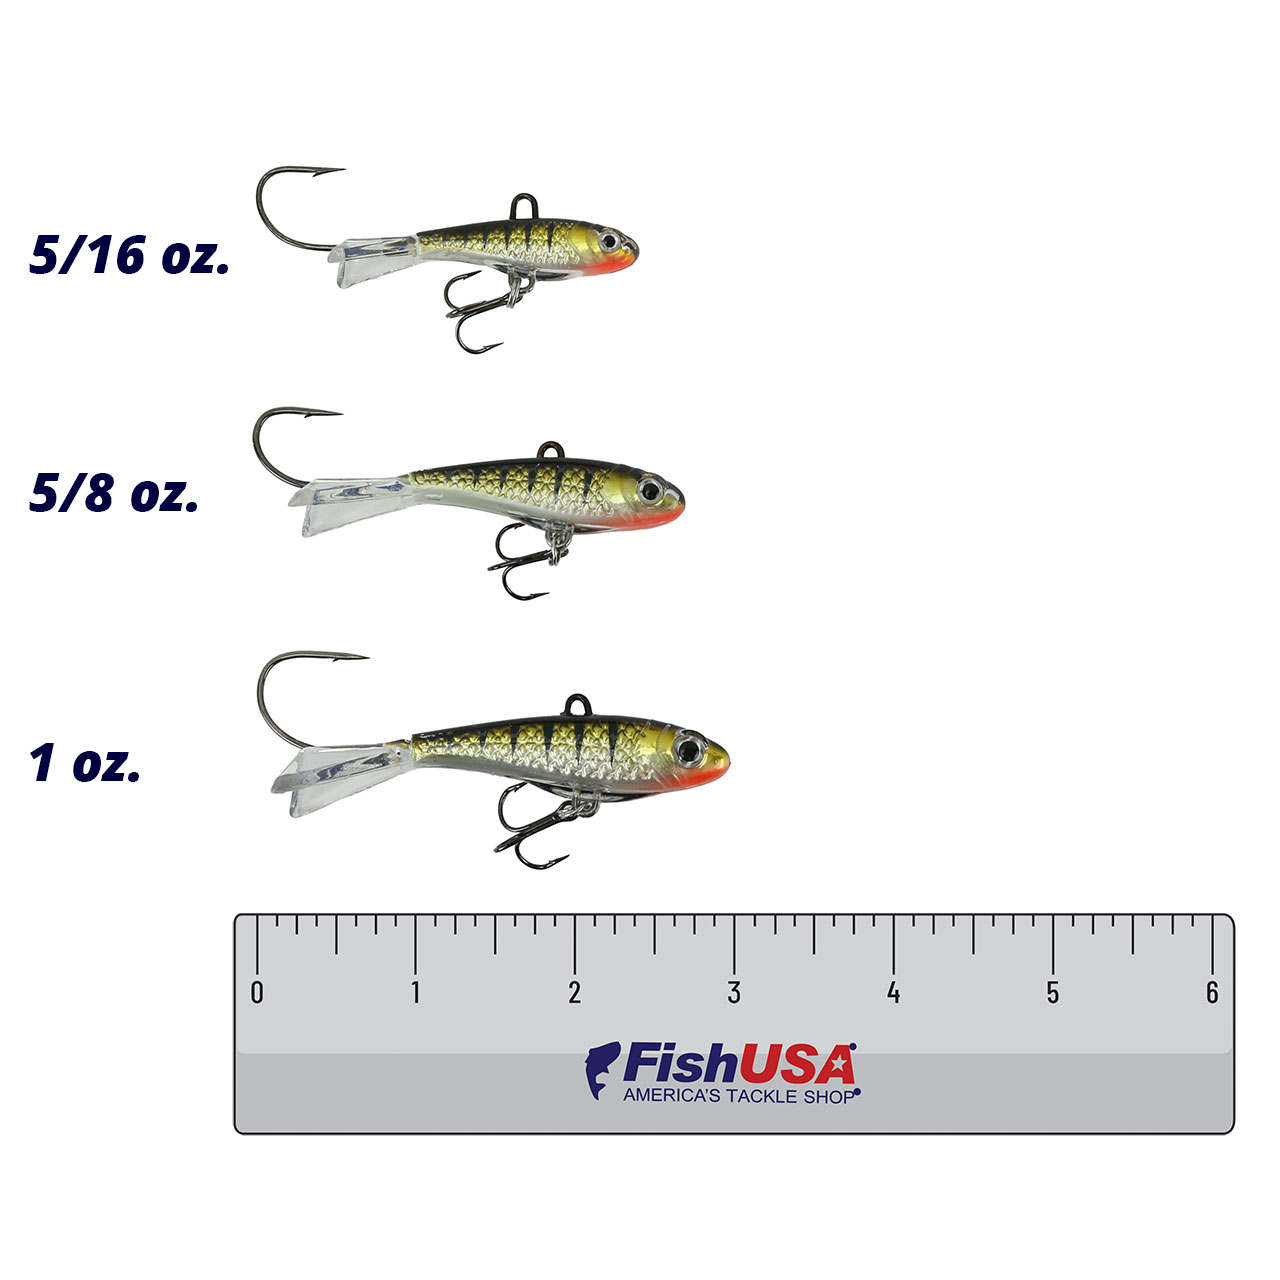 NORTHLAND FISHING TACKLE: 9/16 oz Puppet Minnow UV GREEN PERCH